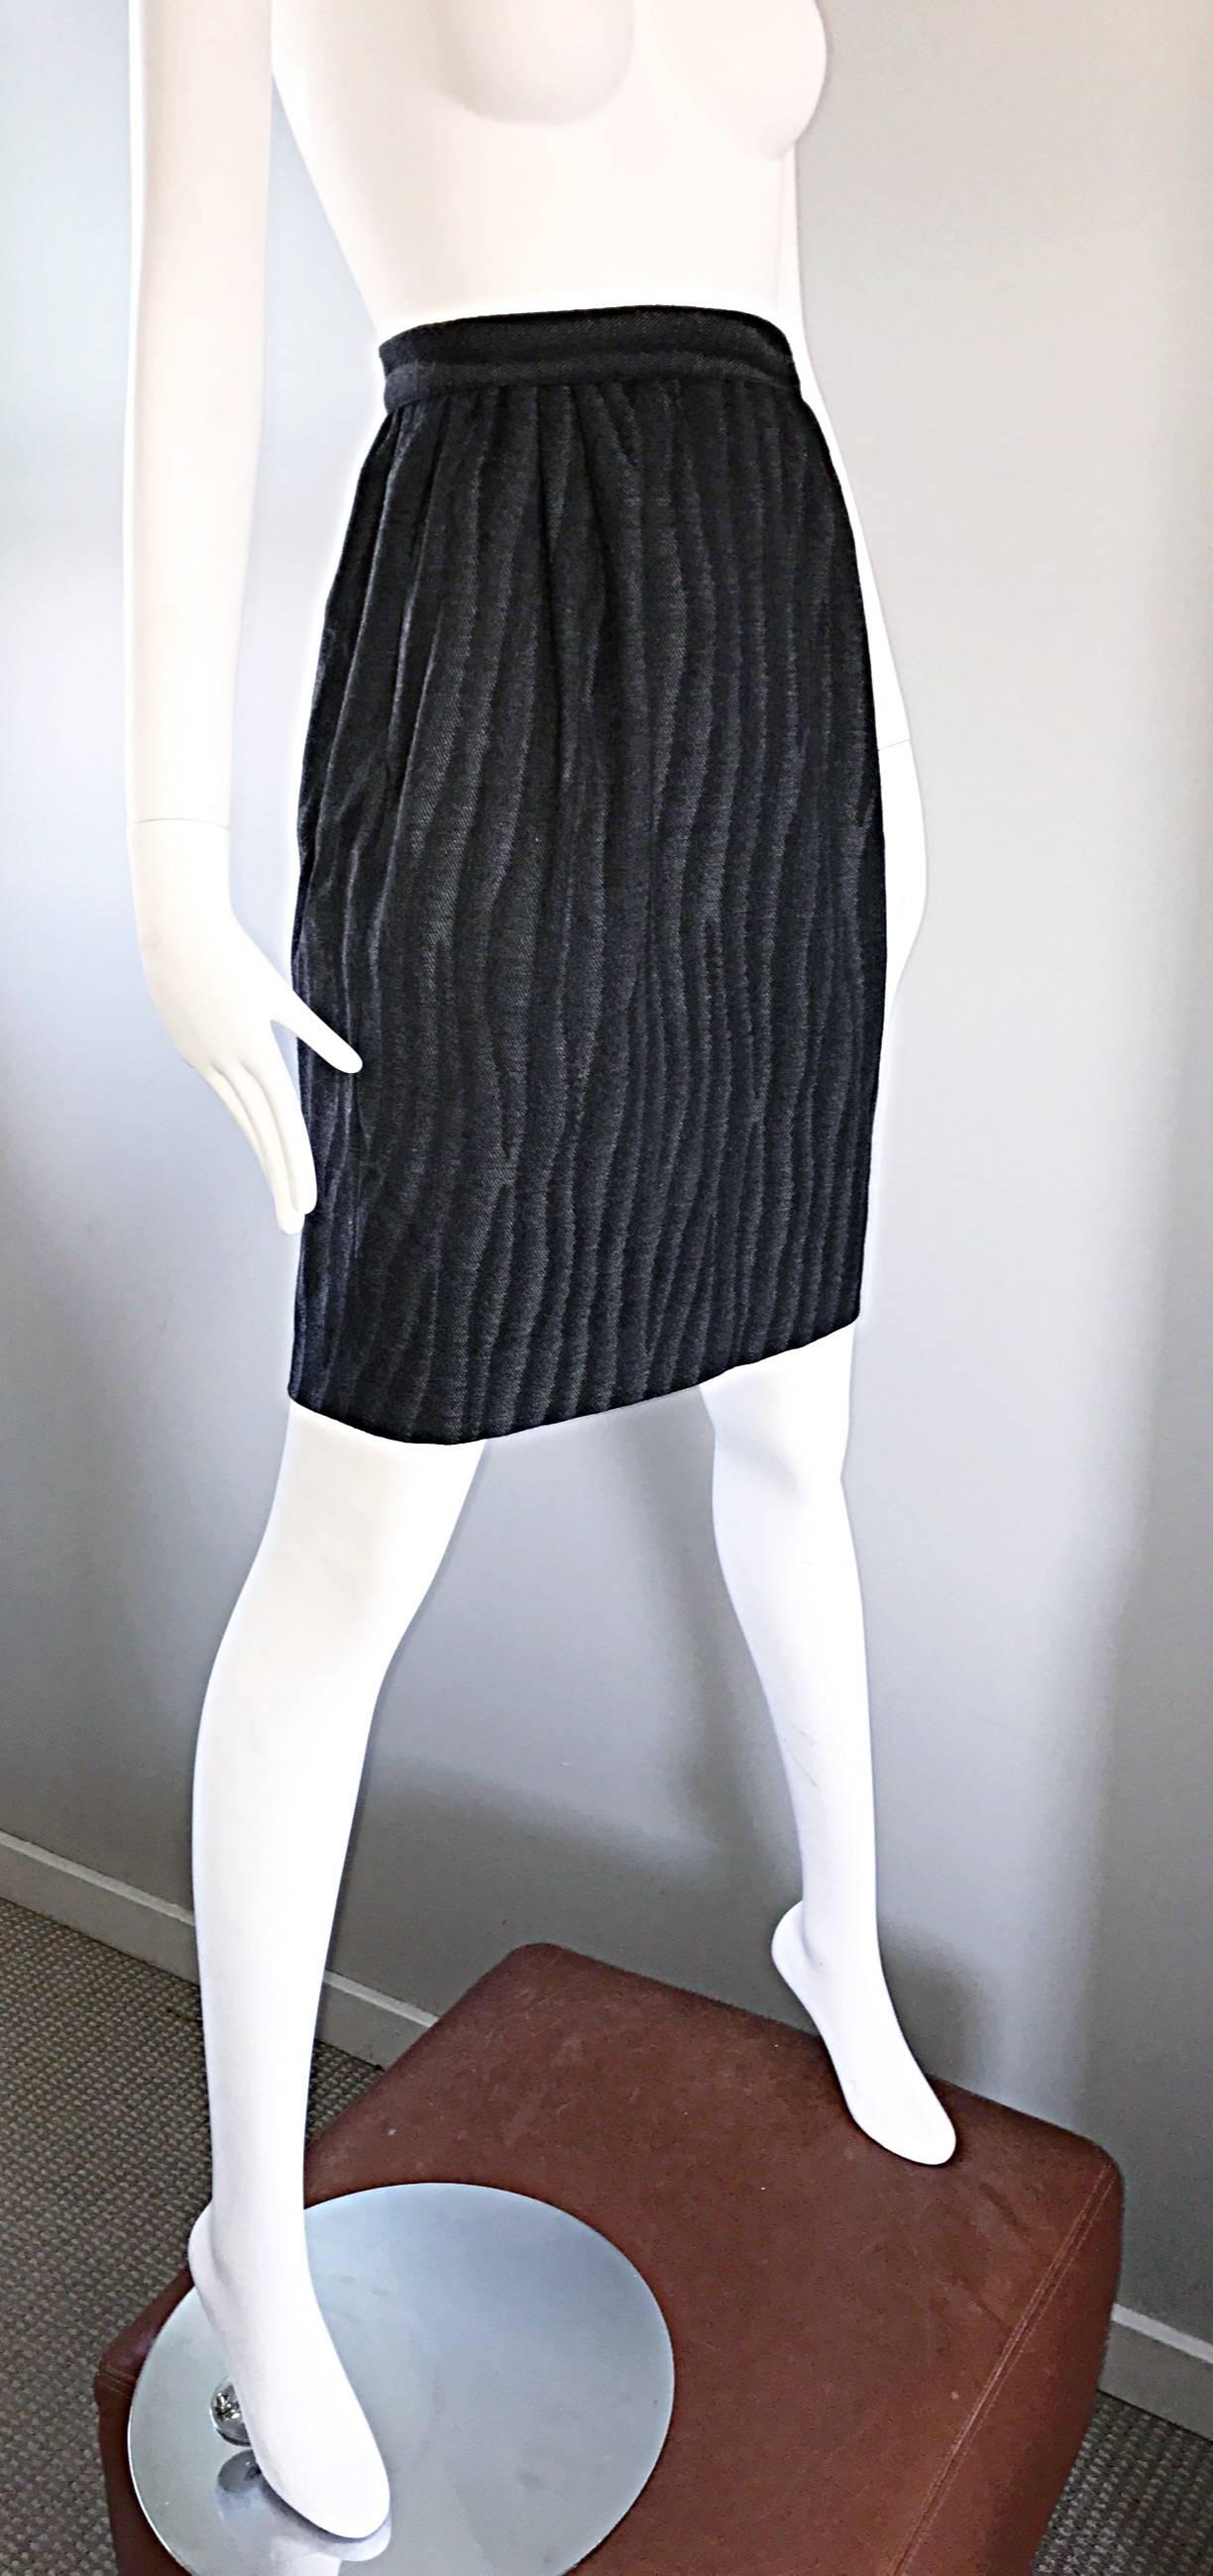 Women's Vintage Valentino 1980s Optical Illusion Gray + Black High Waisted Pencil Skirt For Sale